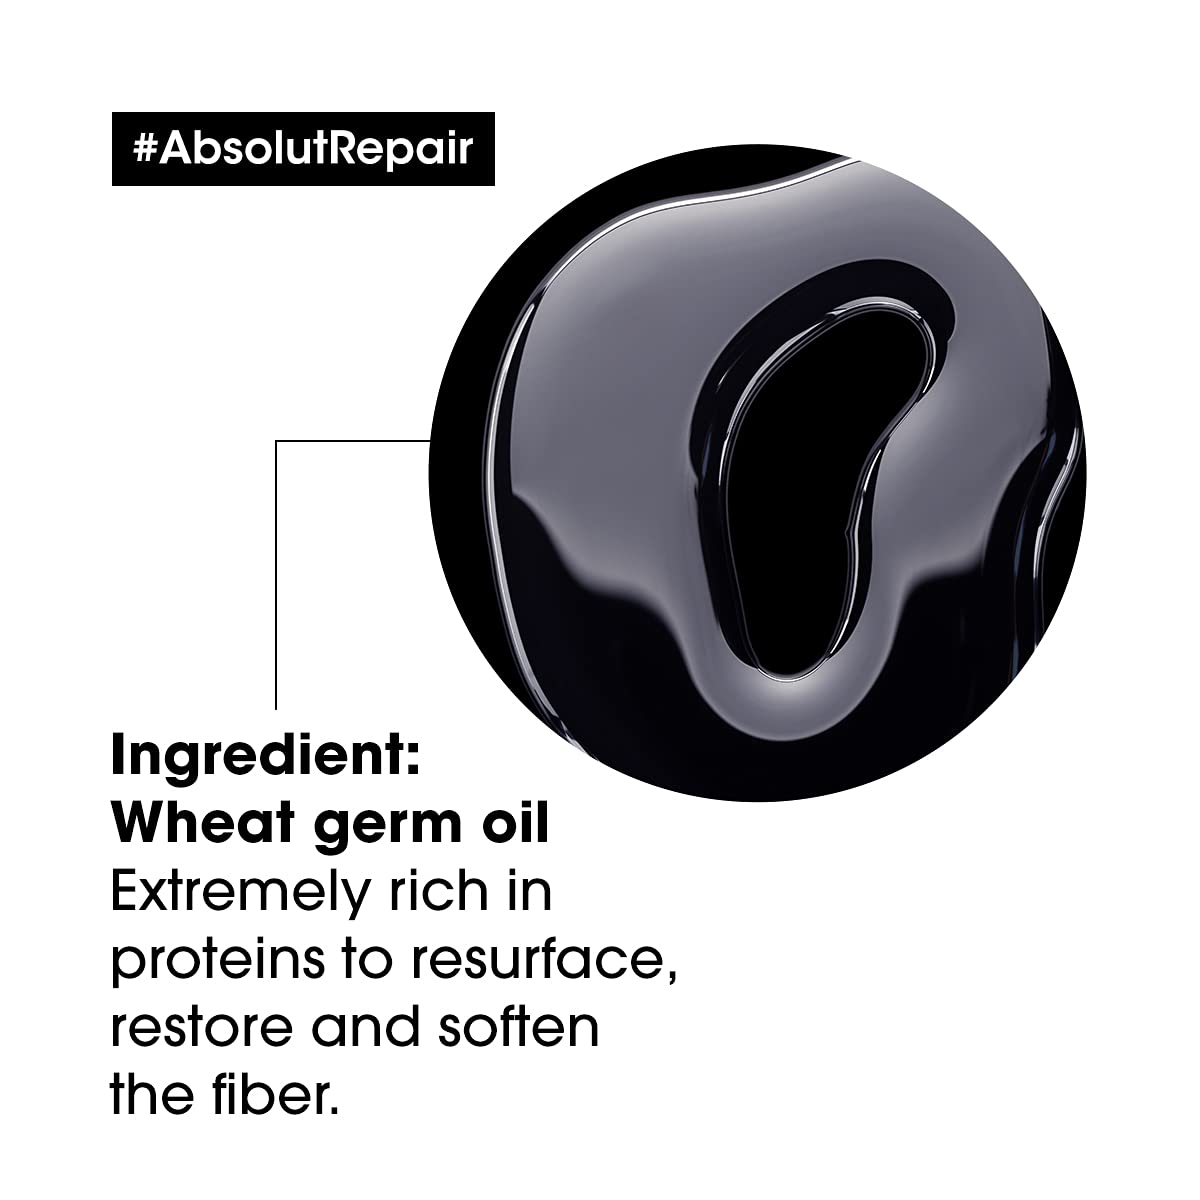 L’Oréal Professionnel Absolut Repair Oil 10-in-1 Multi-benefit Leave-In Hair Serum with Wheat Germ Oil for Dry & Damaged Hair, Serie Expert, 90ml